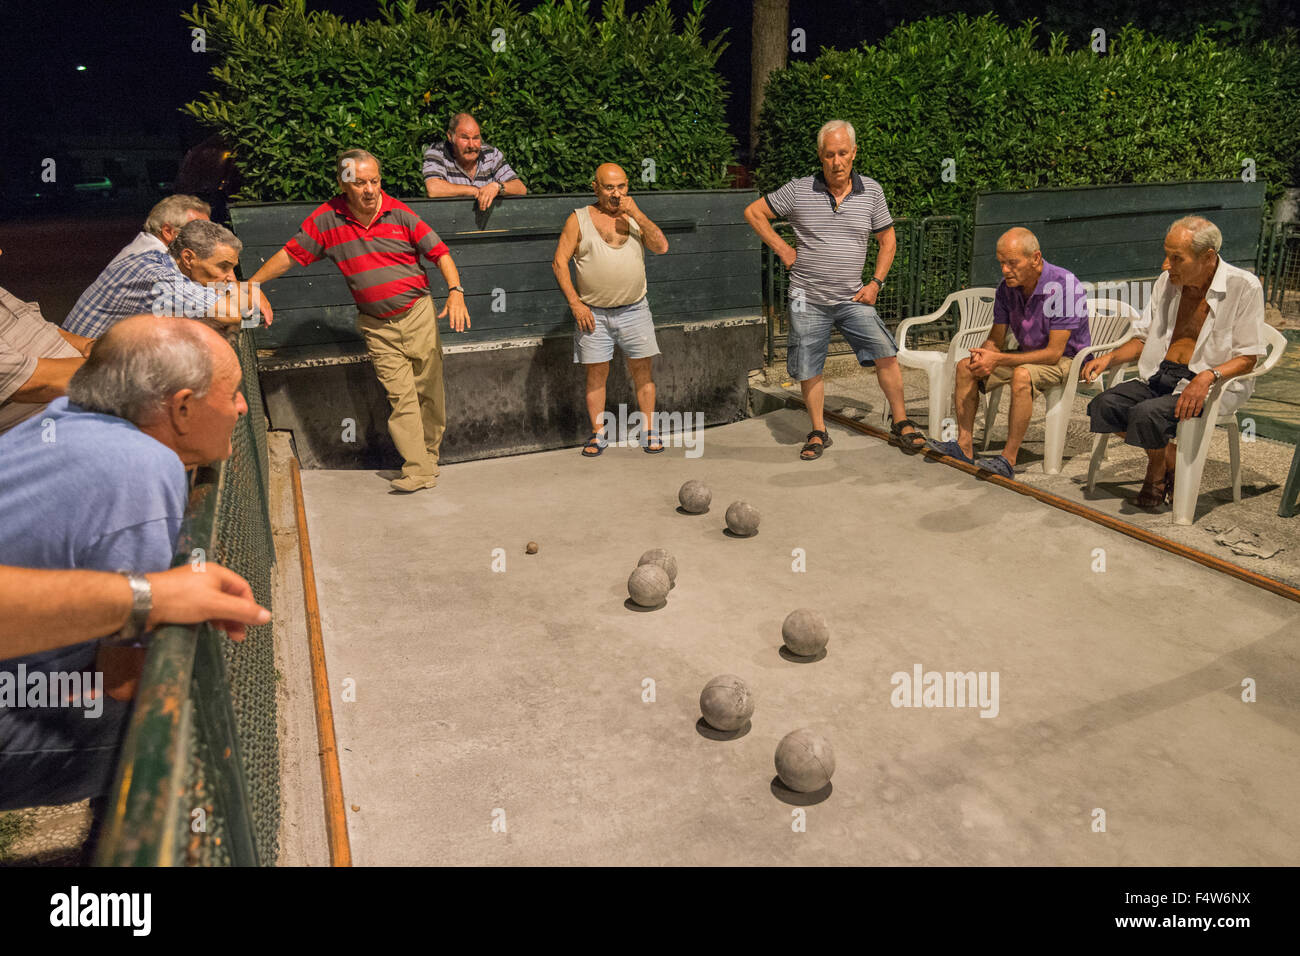 Local men being played bocce ball on outdoor court in Colle di Val d'Elsa, Tuscany, Italy. Stock Photo